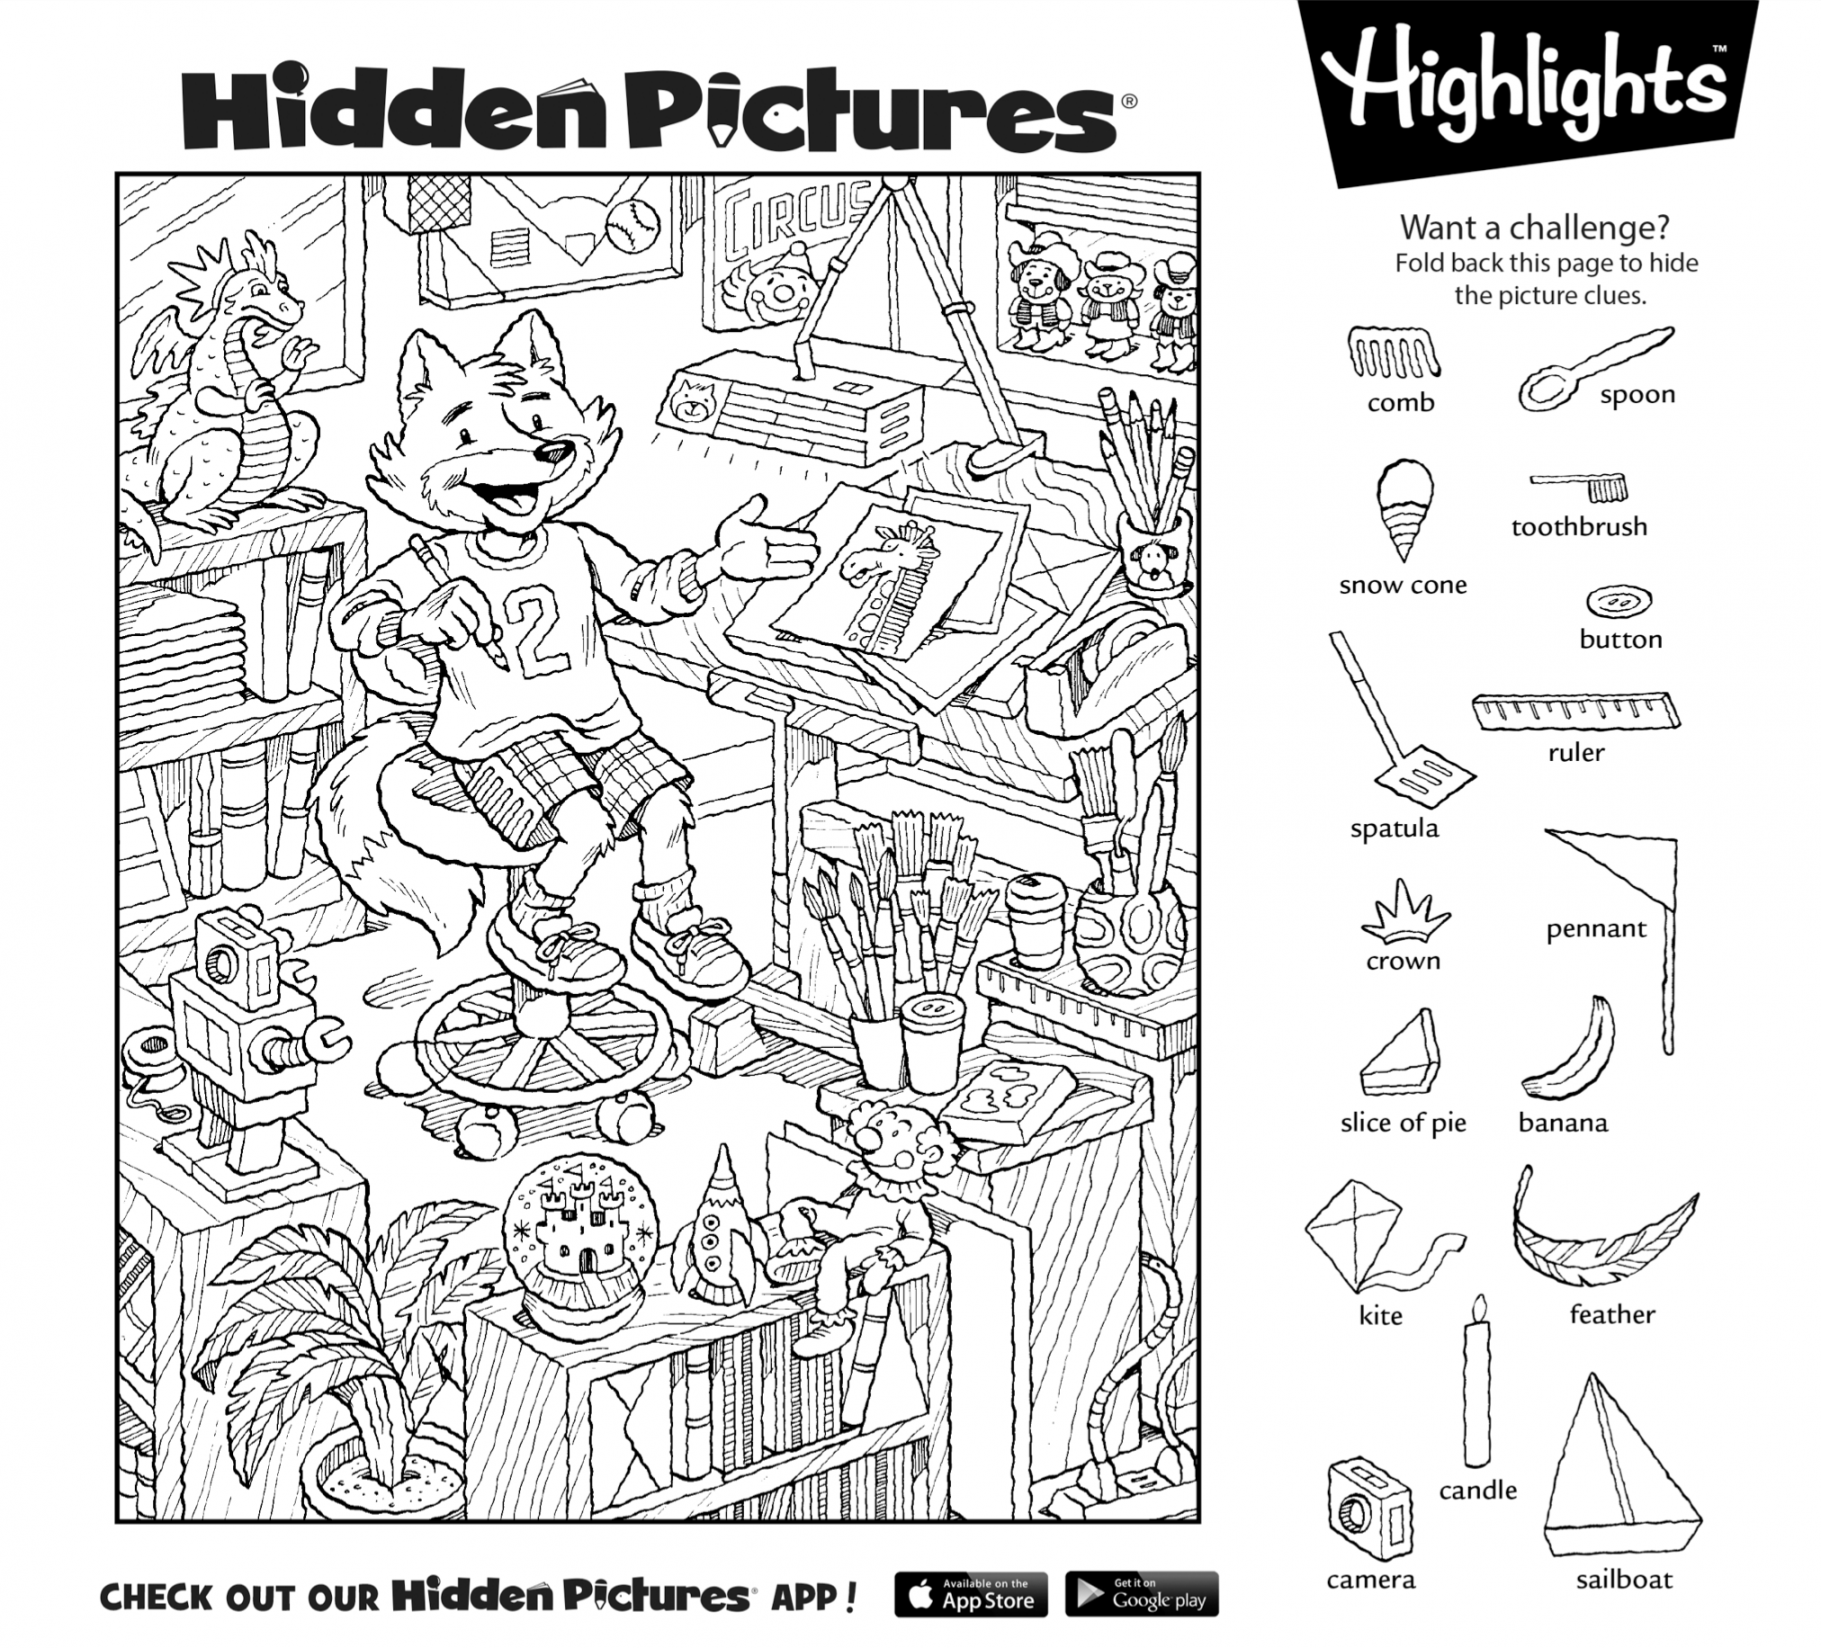 Download this free printable Hidden Pictures puzzle to share with